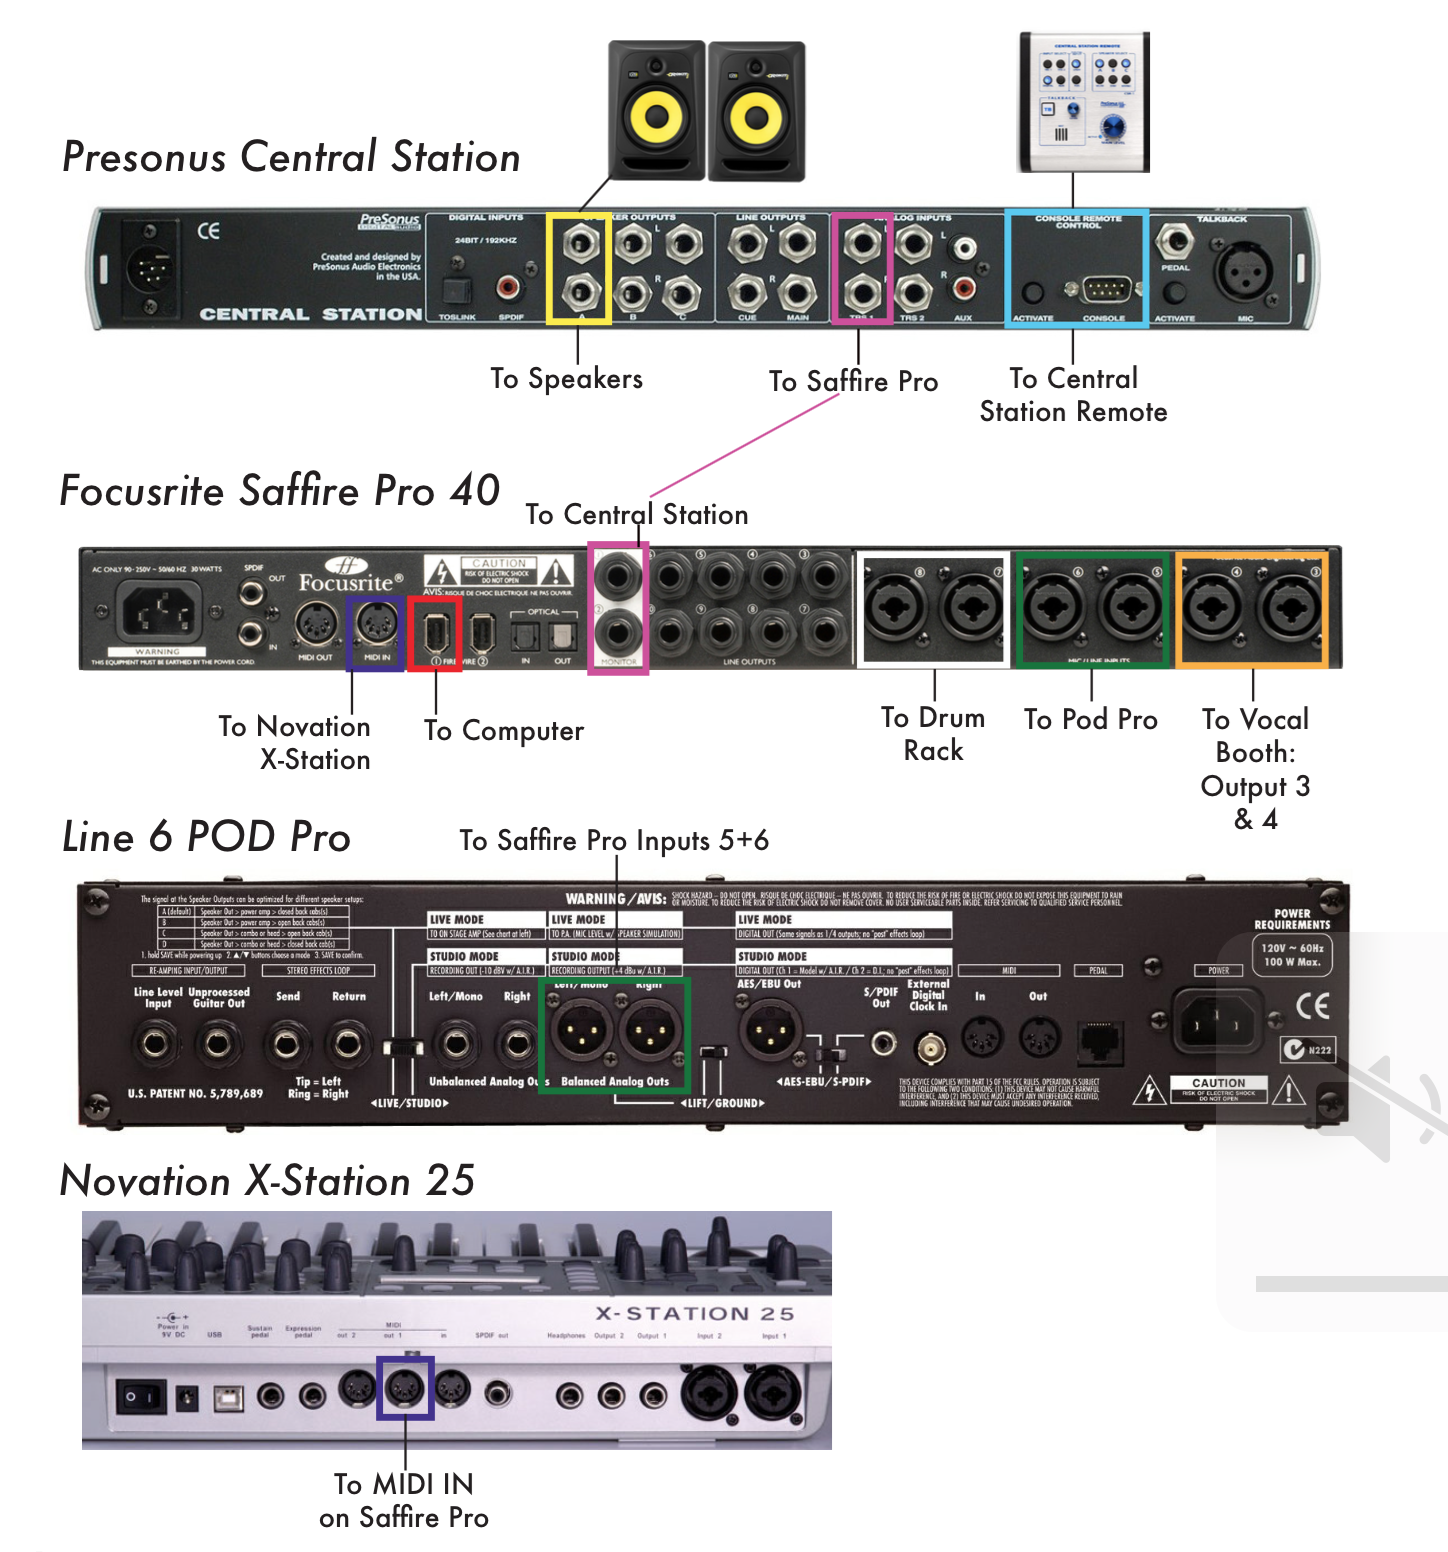 Focusrite Saffire Pro 24. Focusrite Saffire Pro 40. PRESONUS Central Station Plus manual. Драйвер Focusrite Saffire 14 Pro.